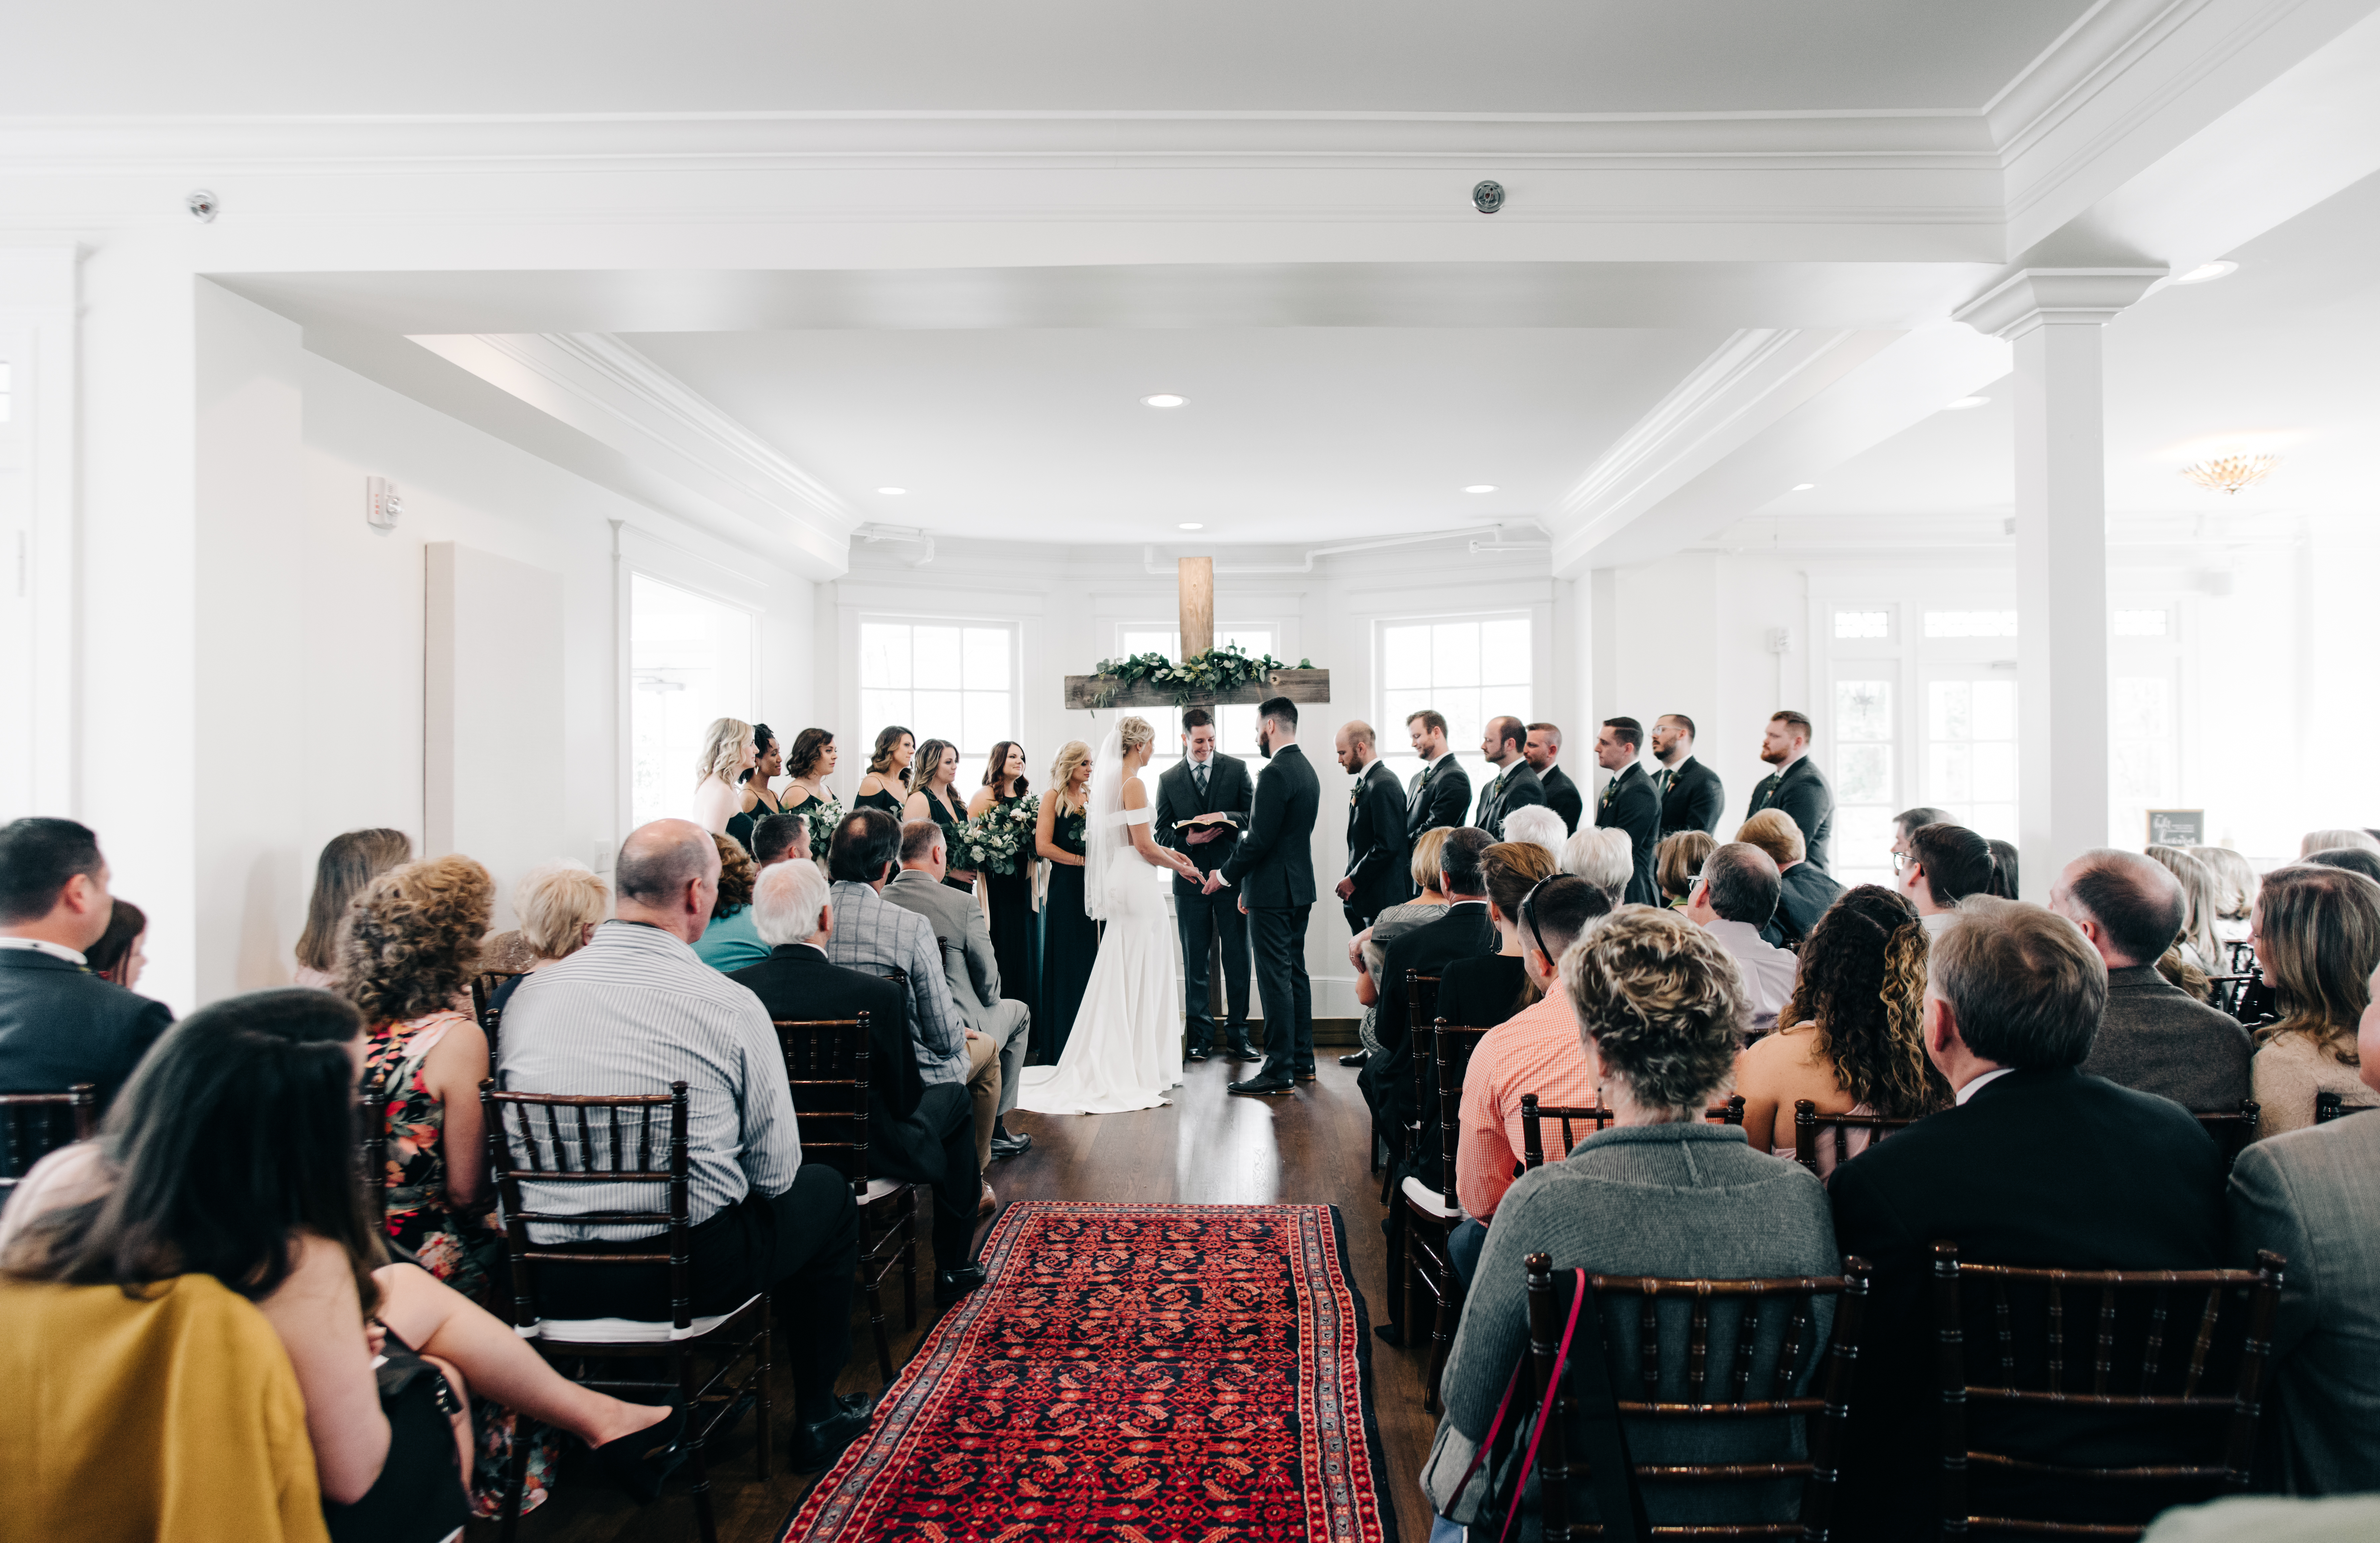 Winter Wedding at McAlister-Leftwich House in Greensboro, NC